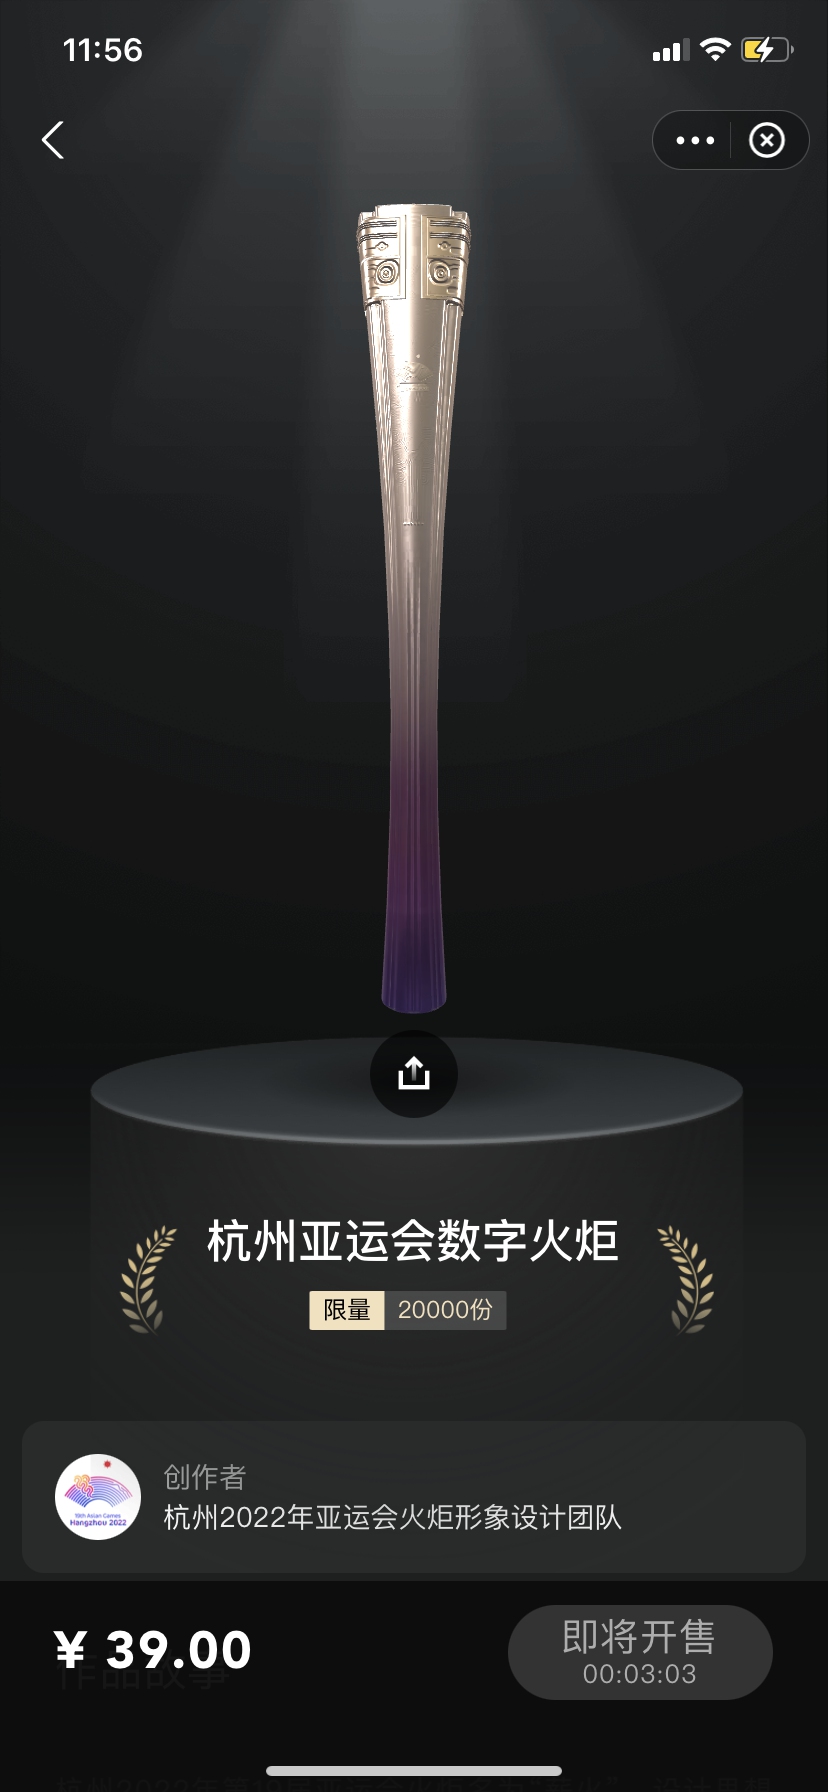 Photo: The torch non-fungible token (NFT) issued by 2022 Asian Games in Hangzhou 